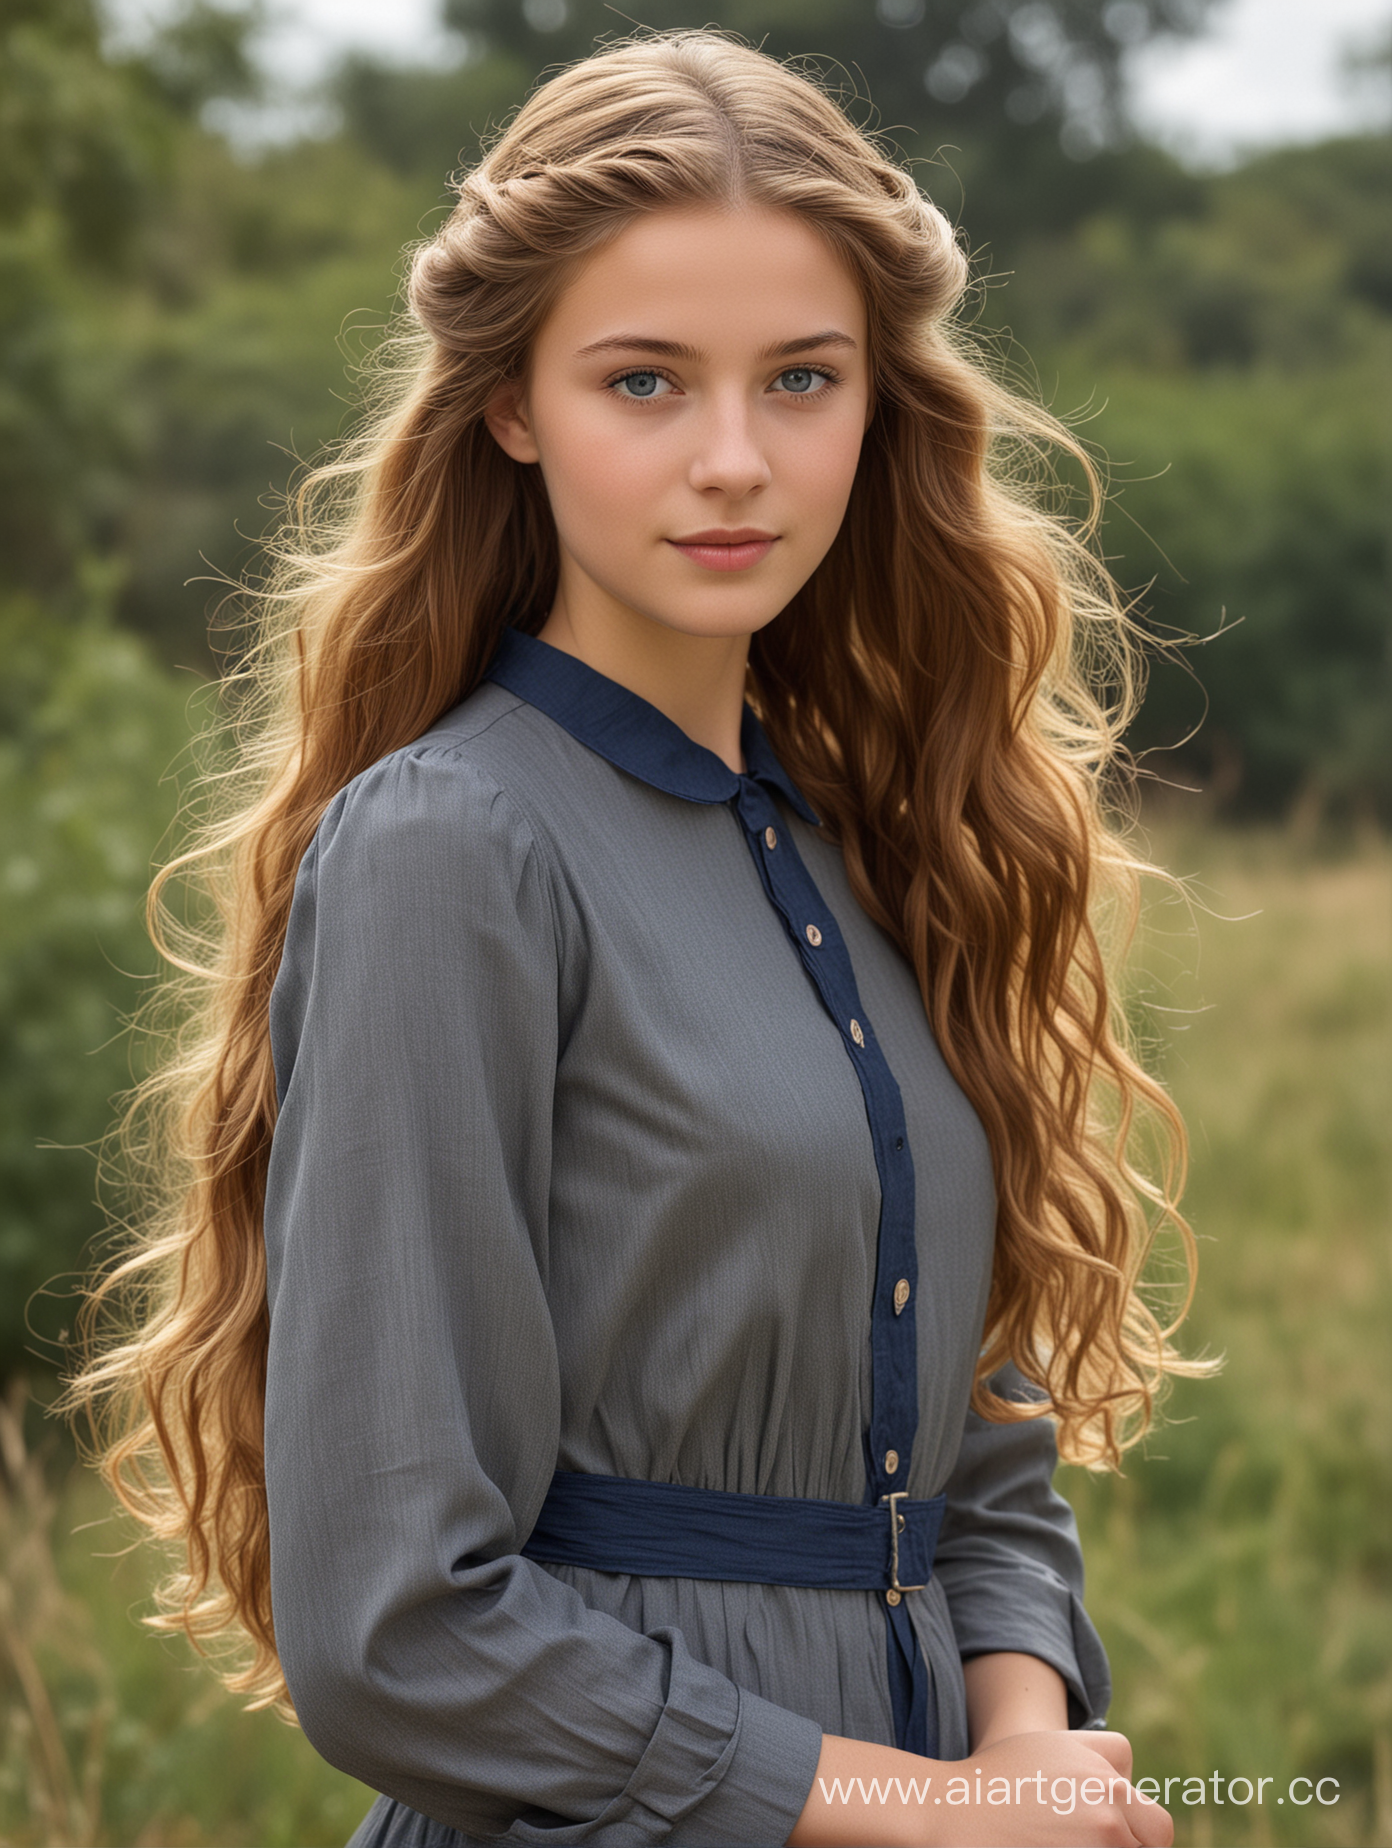 Clarisse Vannier, a 17-year-old Belgian girl, elegant and docile face, loose tresses of long chestnut hair, dark blue eyes, wear 1930s style clothes. Make the picture realistic like photos.  Clarisse in Kenya, on savannah, show full body